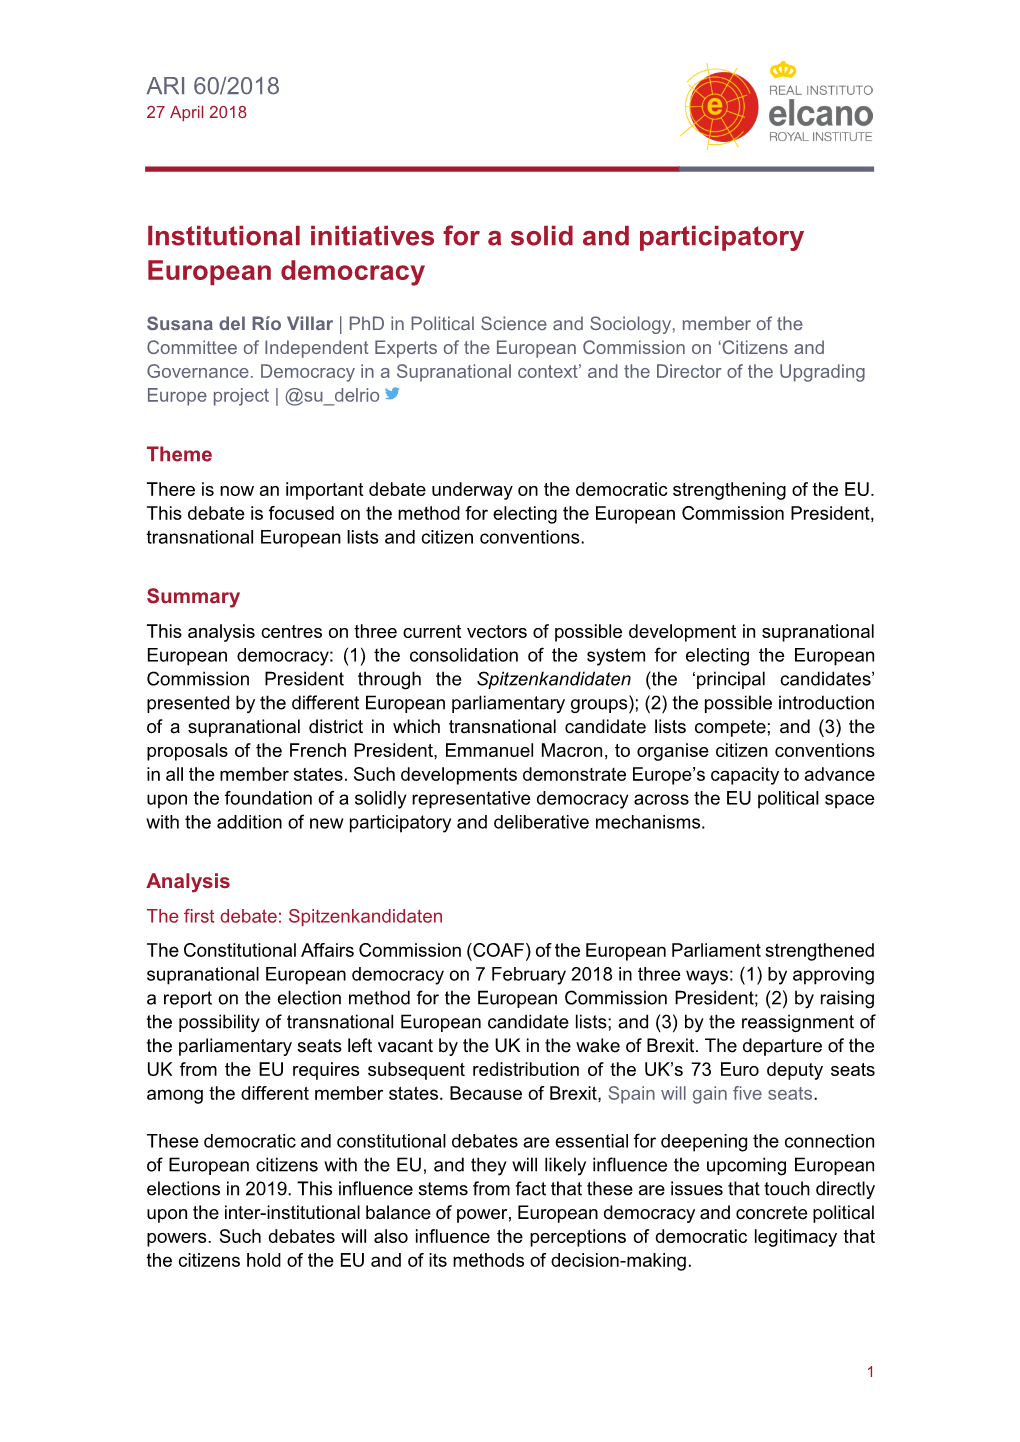 Institutional Initiatives for a Solid and Participatory European Democracy